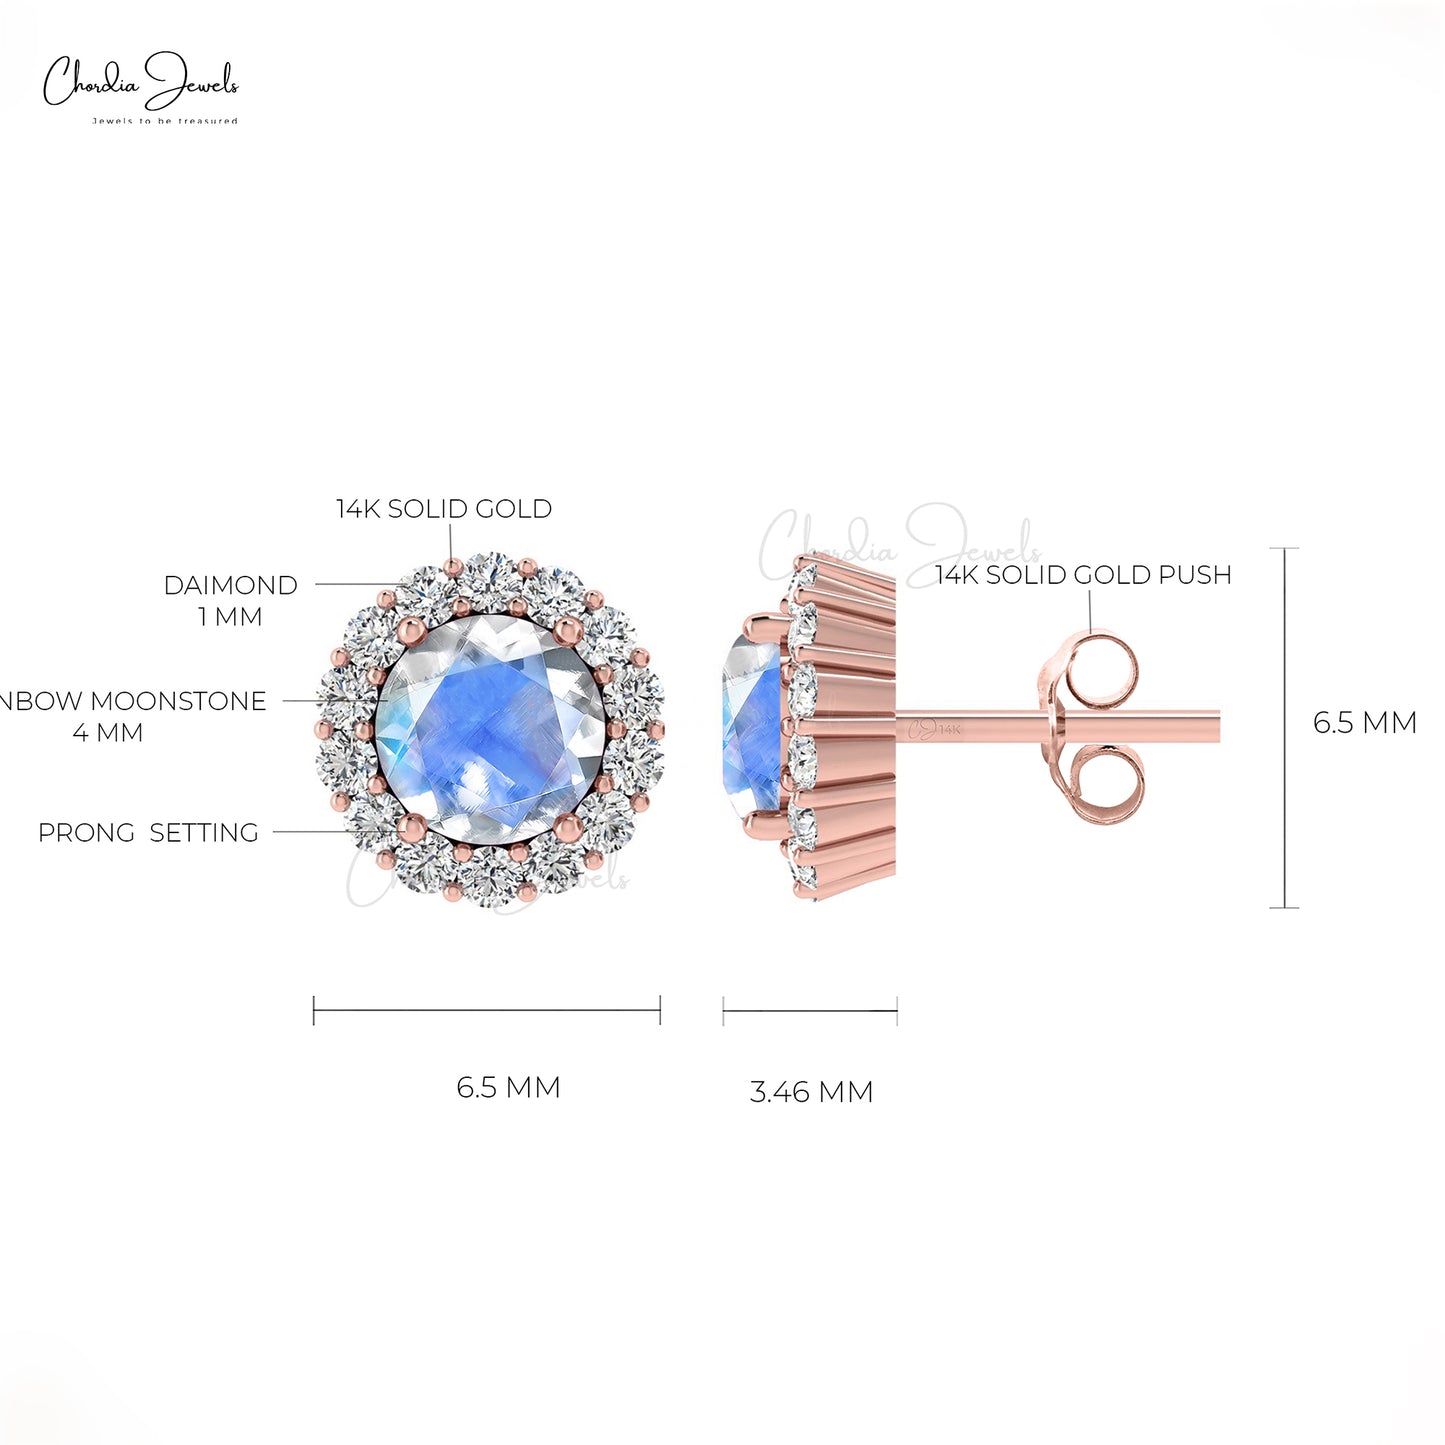 4mm Round Cut Moonstone And Diamond Halo Earrings For Her